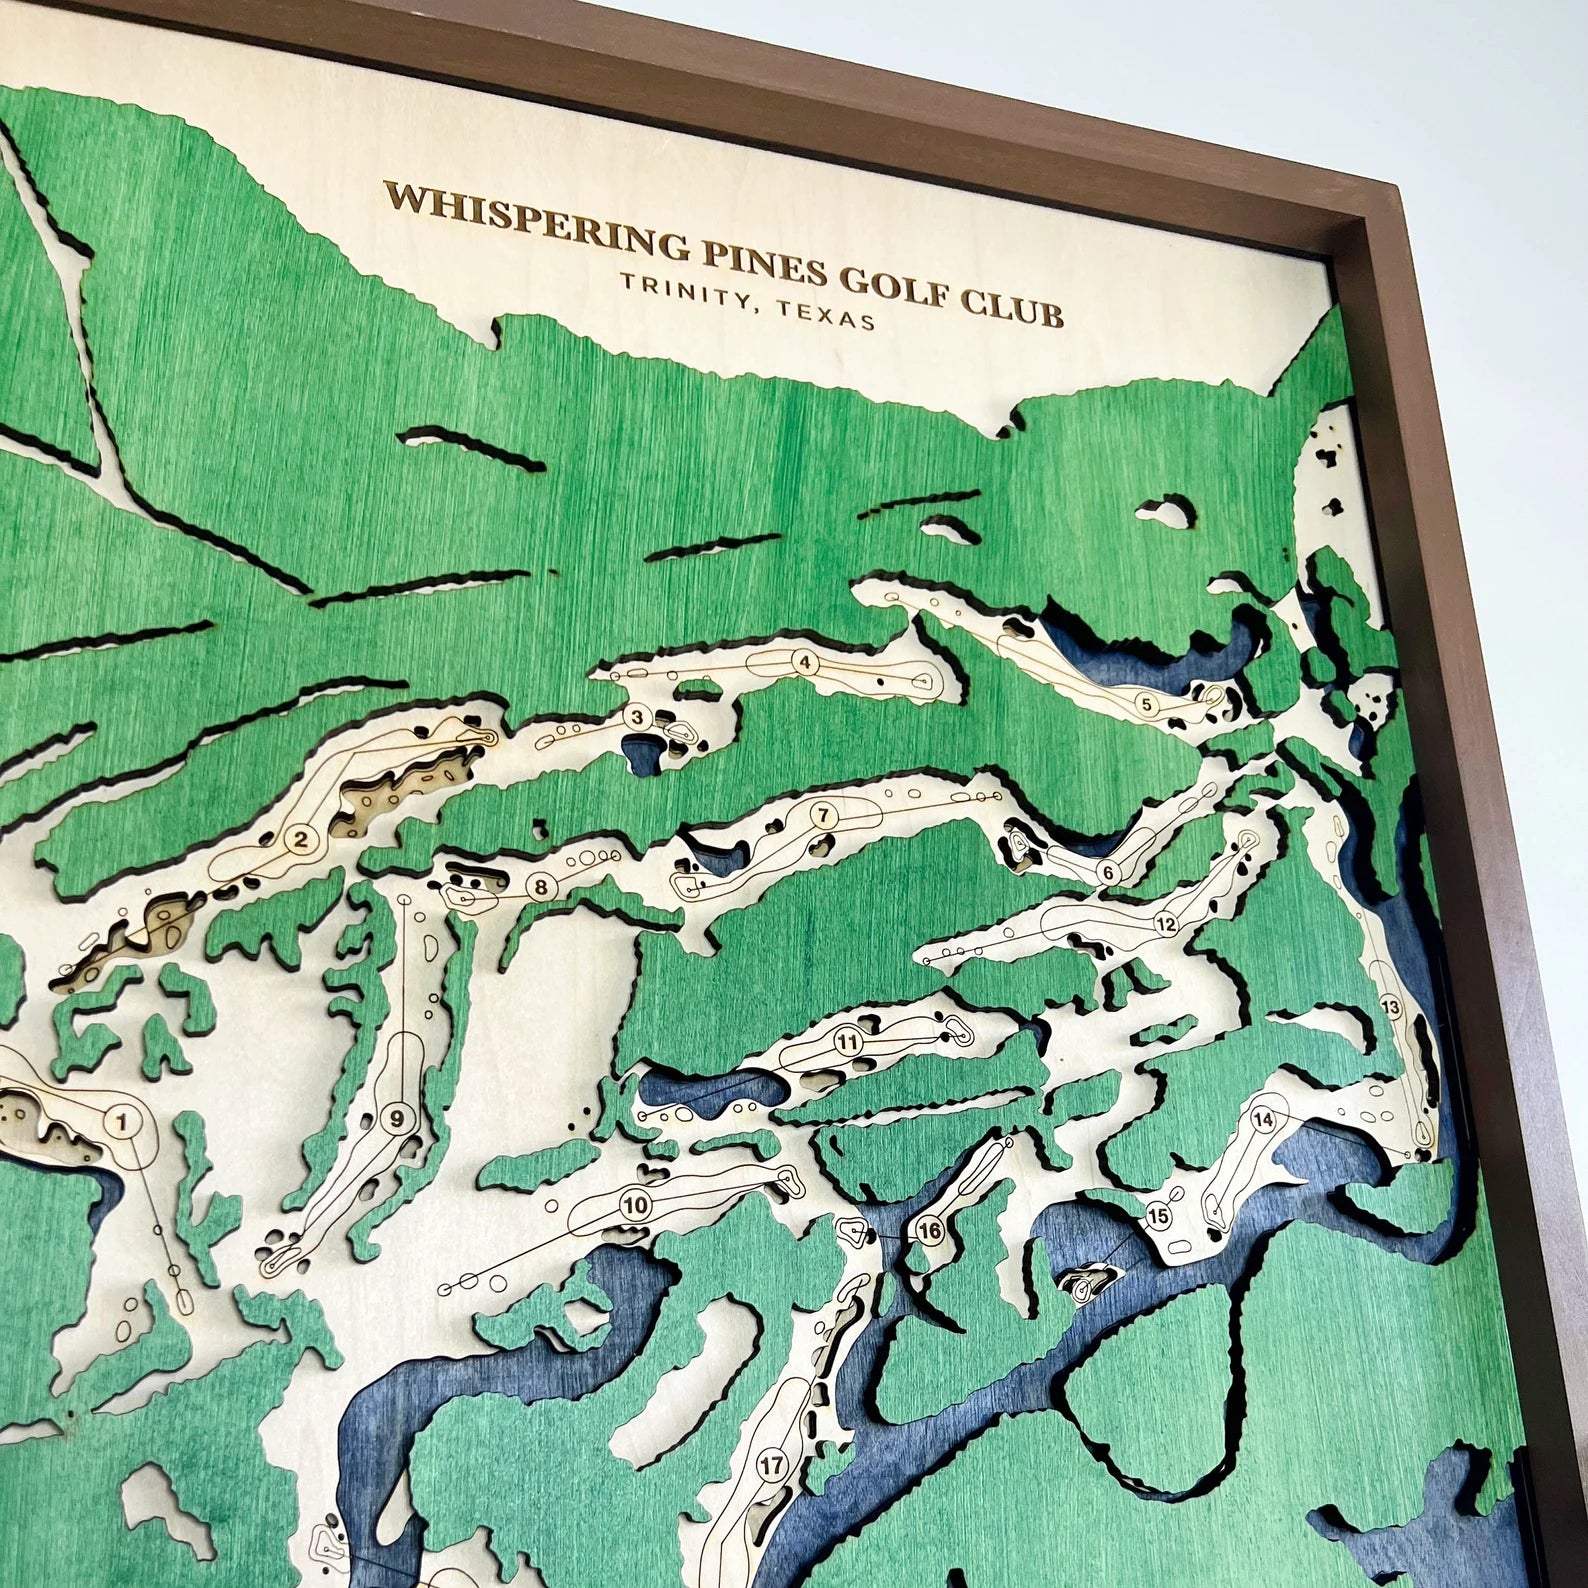 Whispering Pines Golf Club - Handmade Wood Course Map